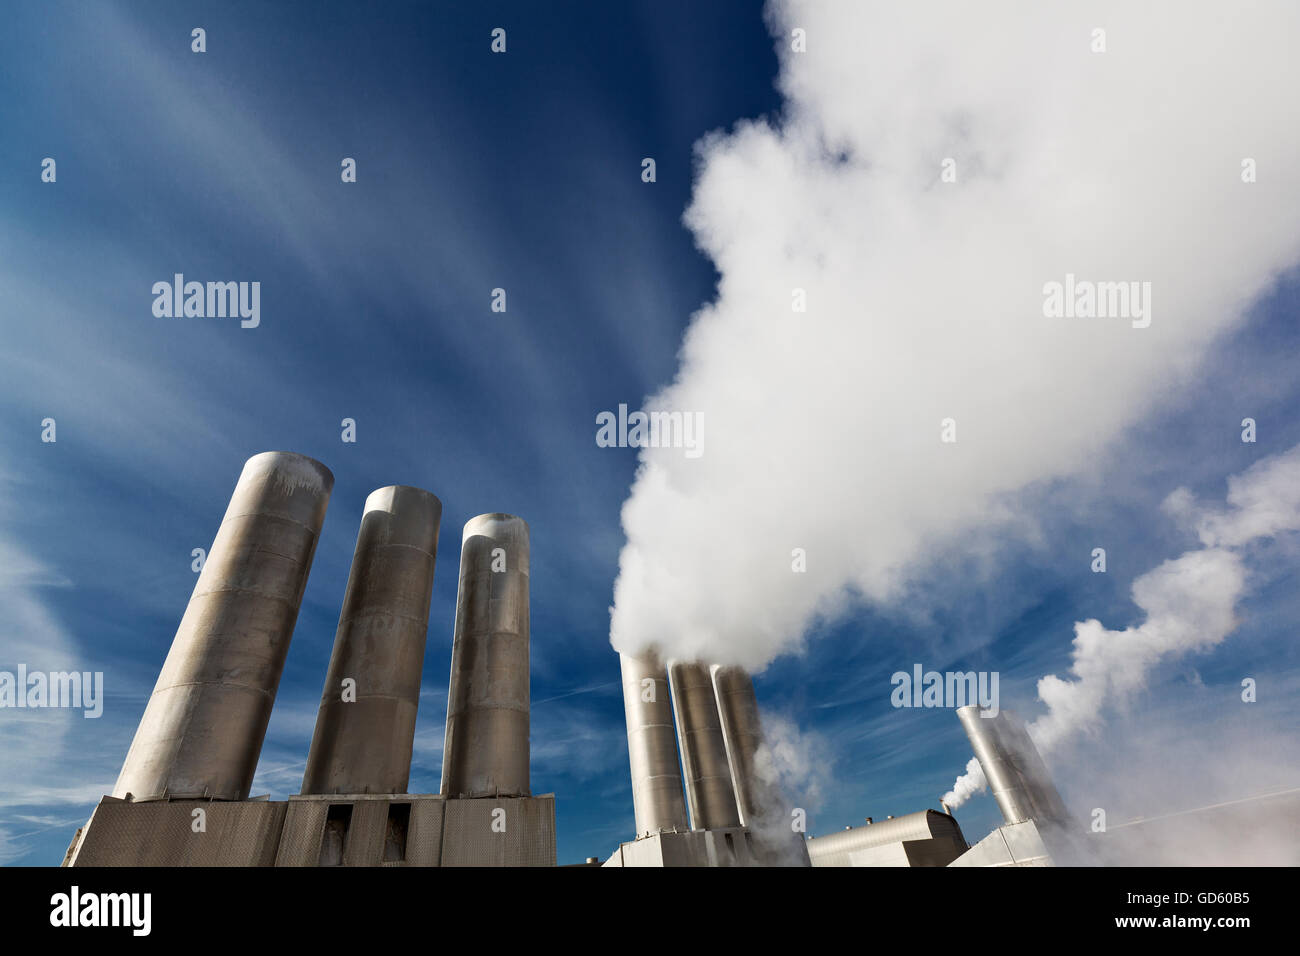 Clean geothermal steam bellows from pipes, Reykjanes Geothermal Power Plant, Iceland Stock Photo